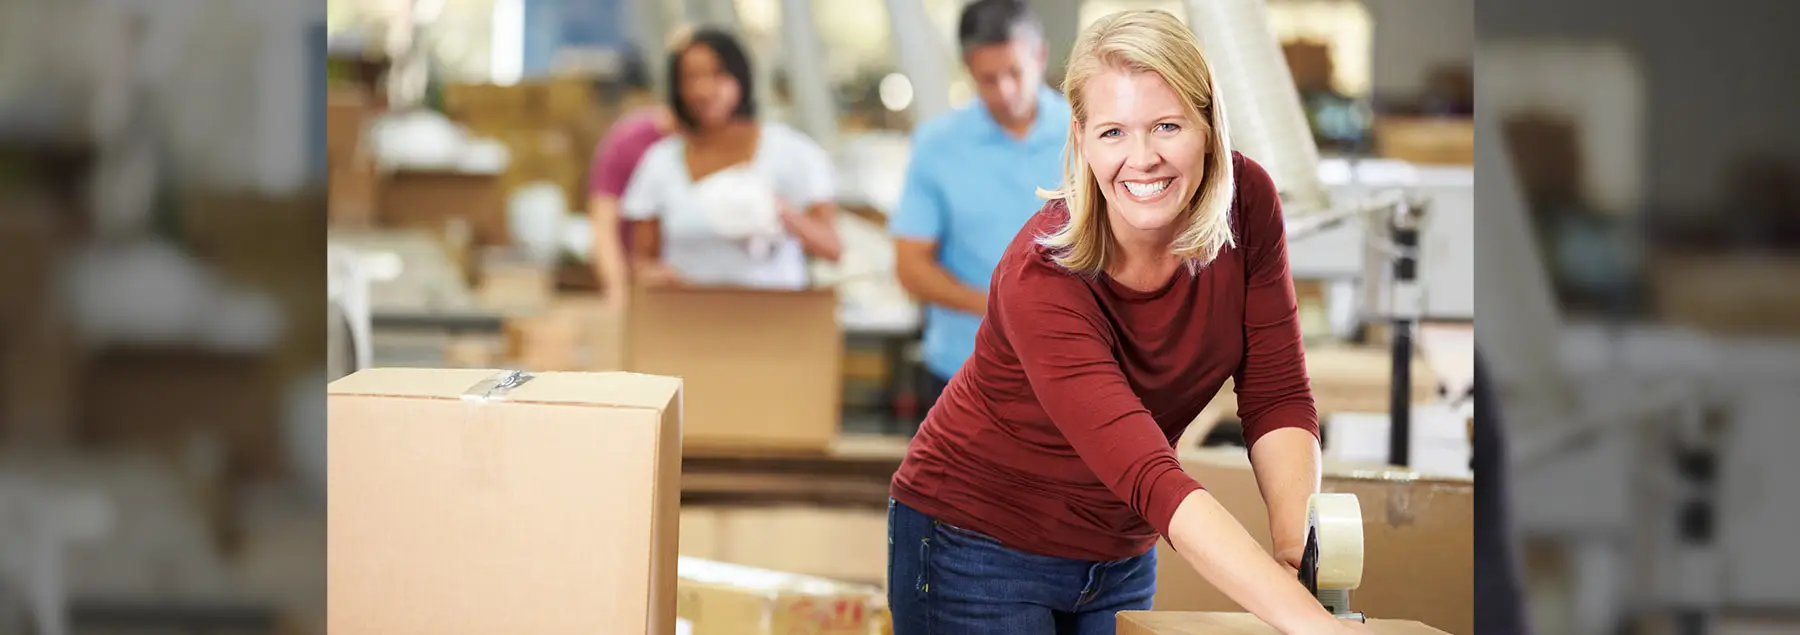 Warehousing, Online Fulfilment, And Distribution For Small Businesses